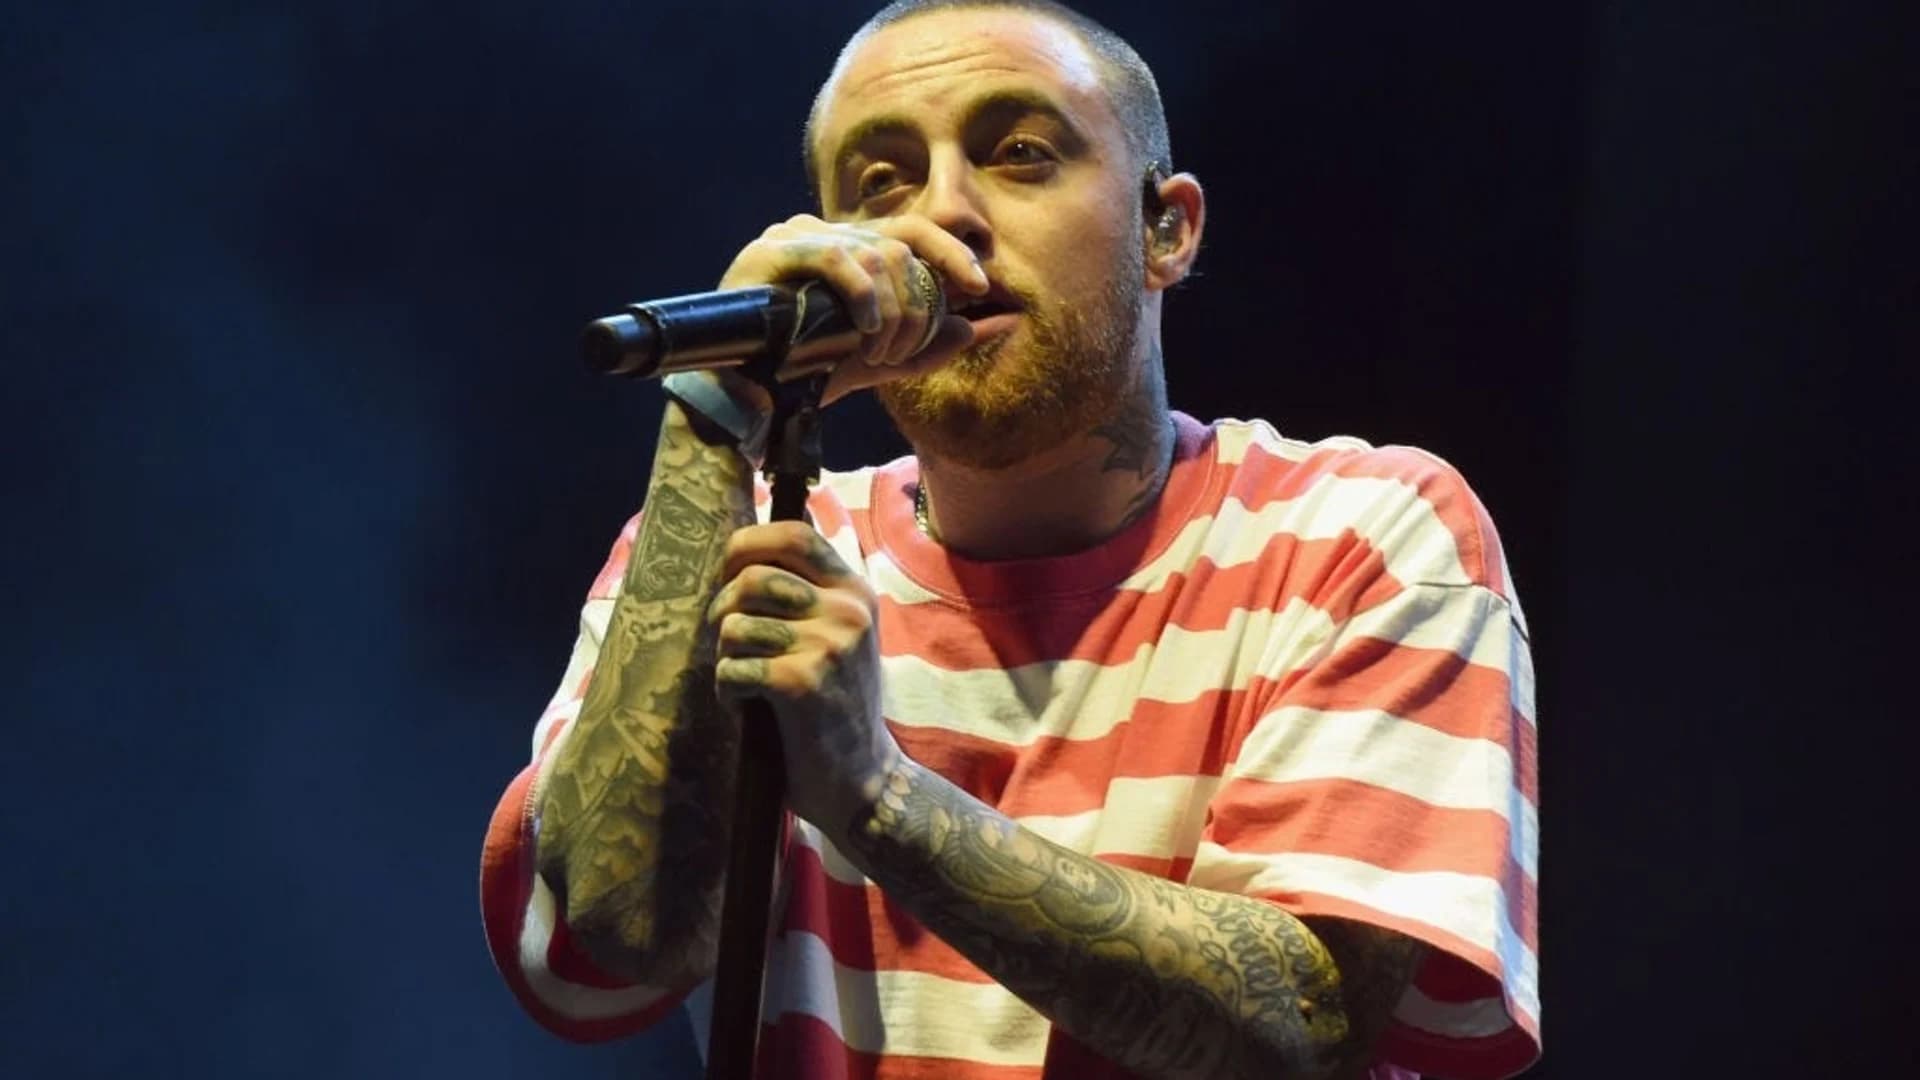 Family: Rapper Mac Miller has died at age 26